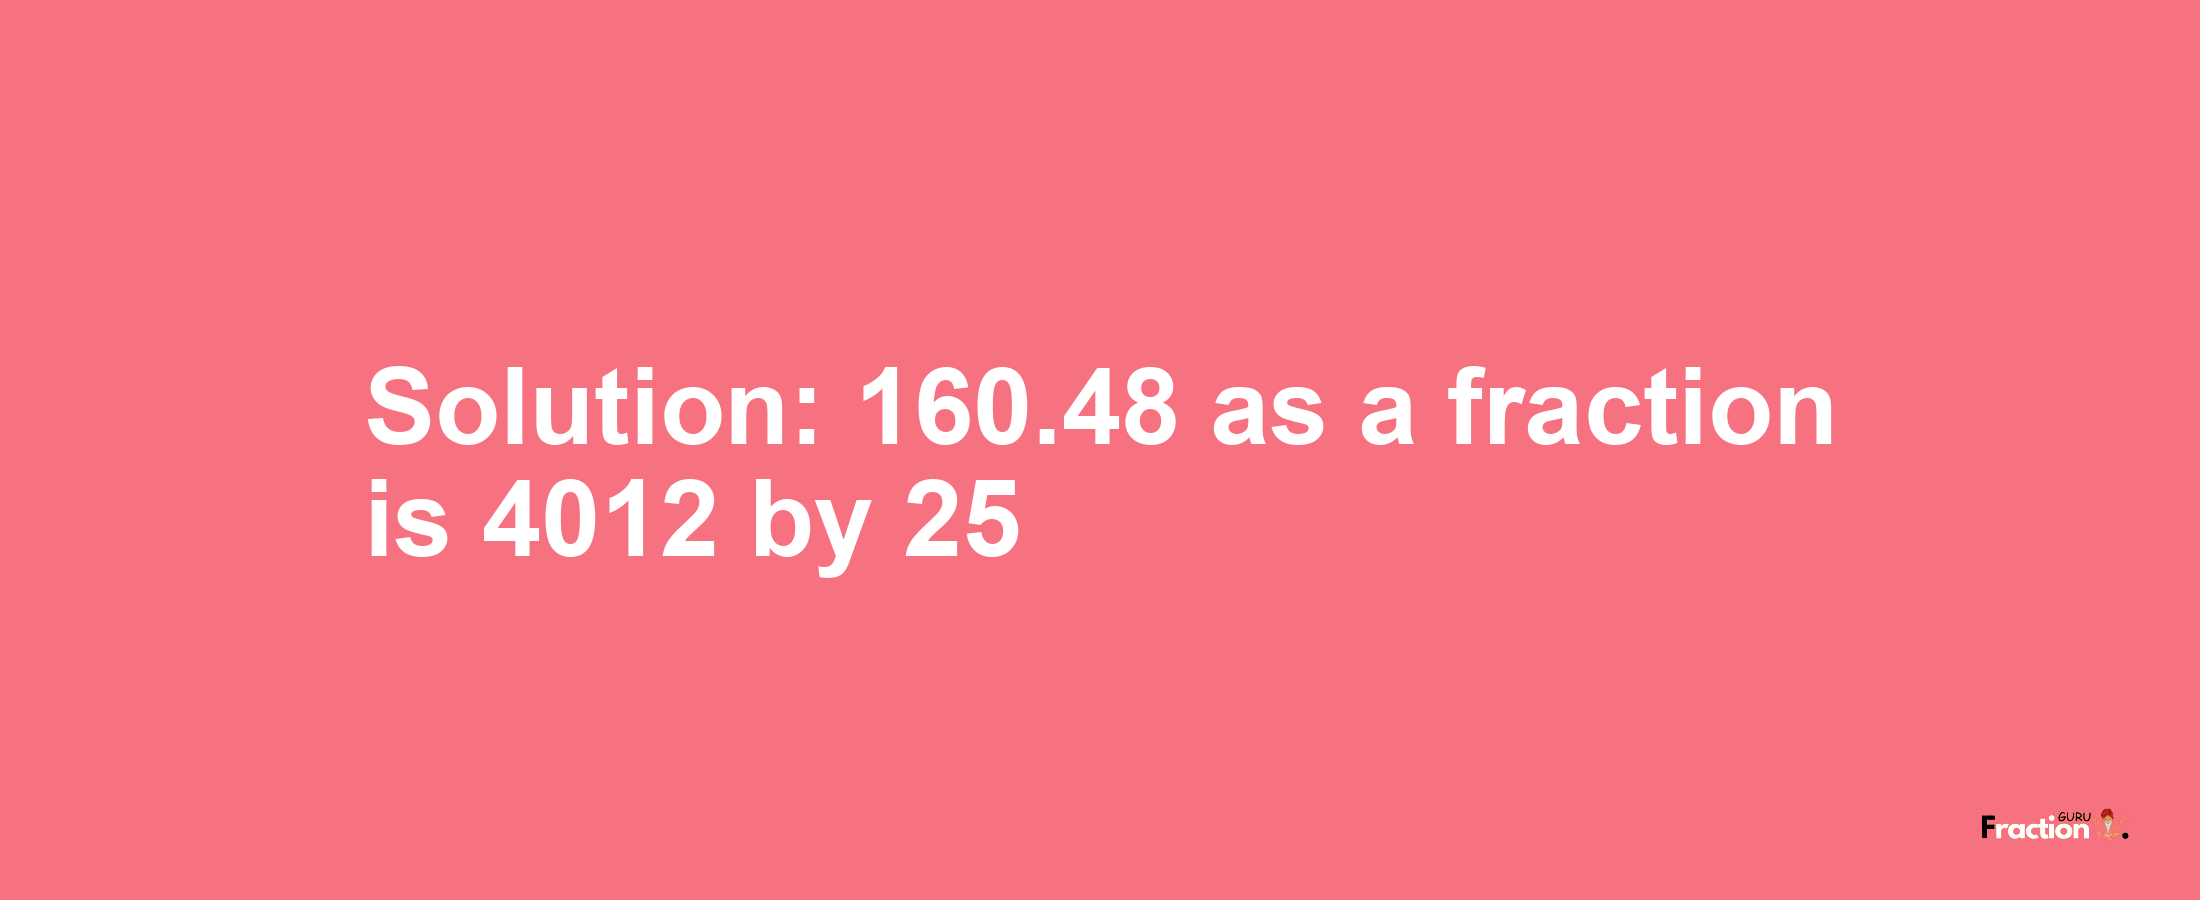 Solution:160.48 as a fraction is 4012/25